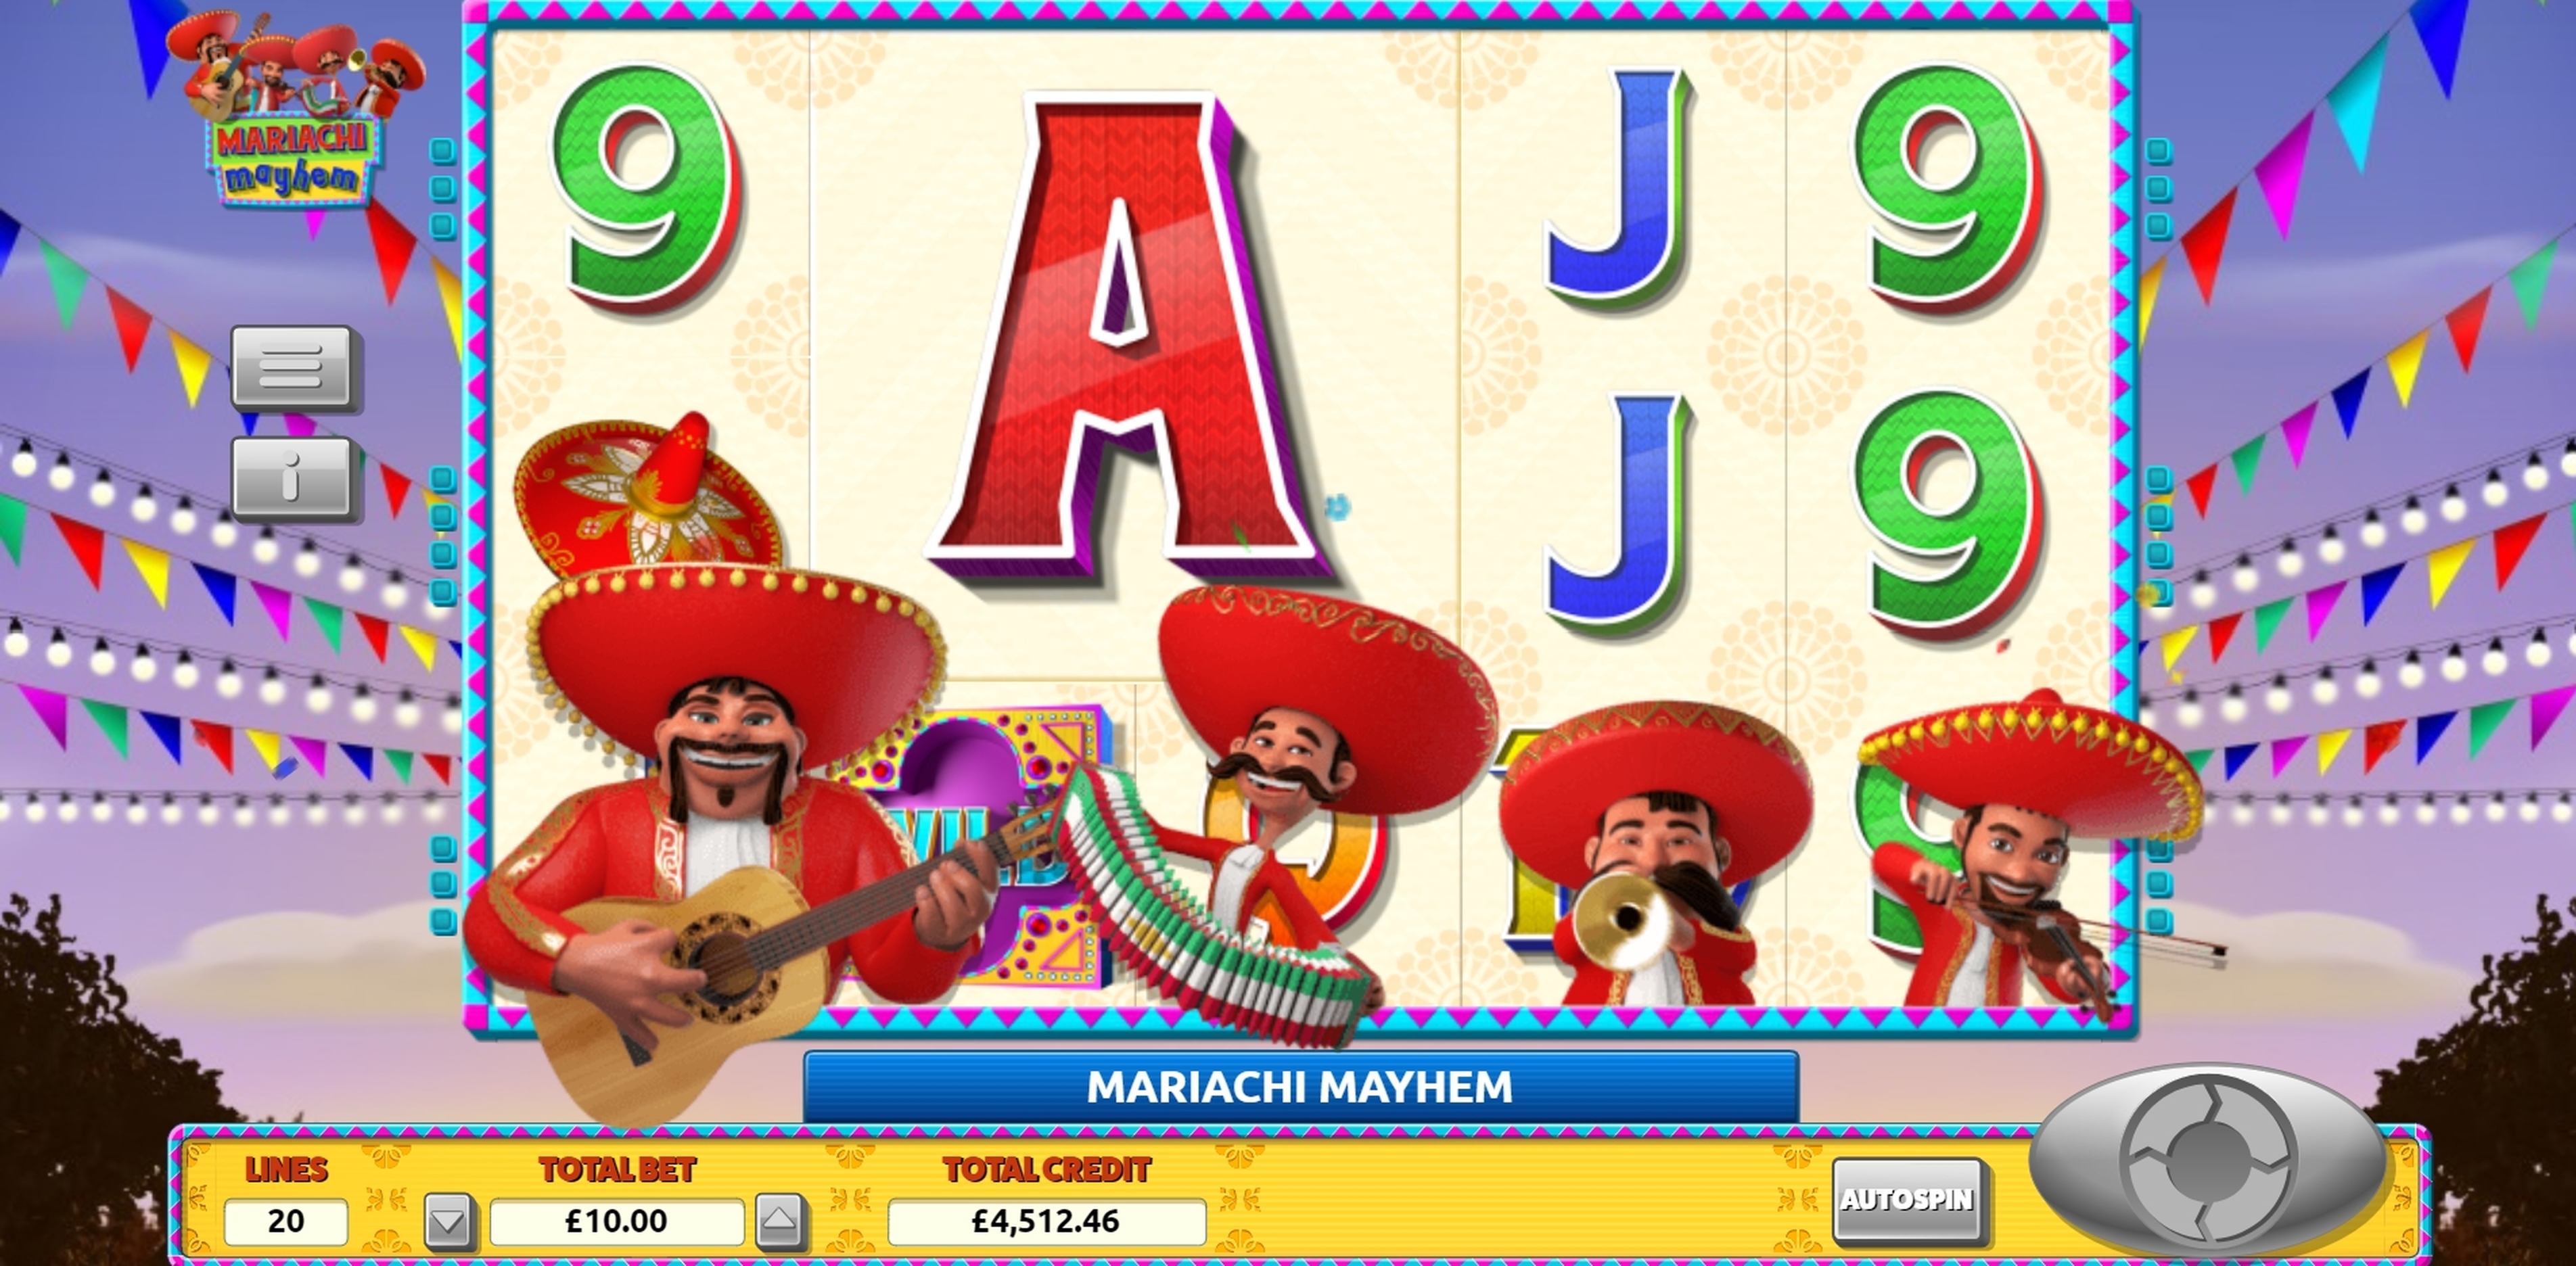 Win Money in Mariachi Mayhem Free Slot Game by The Games Company